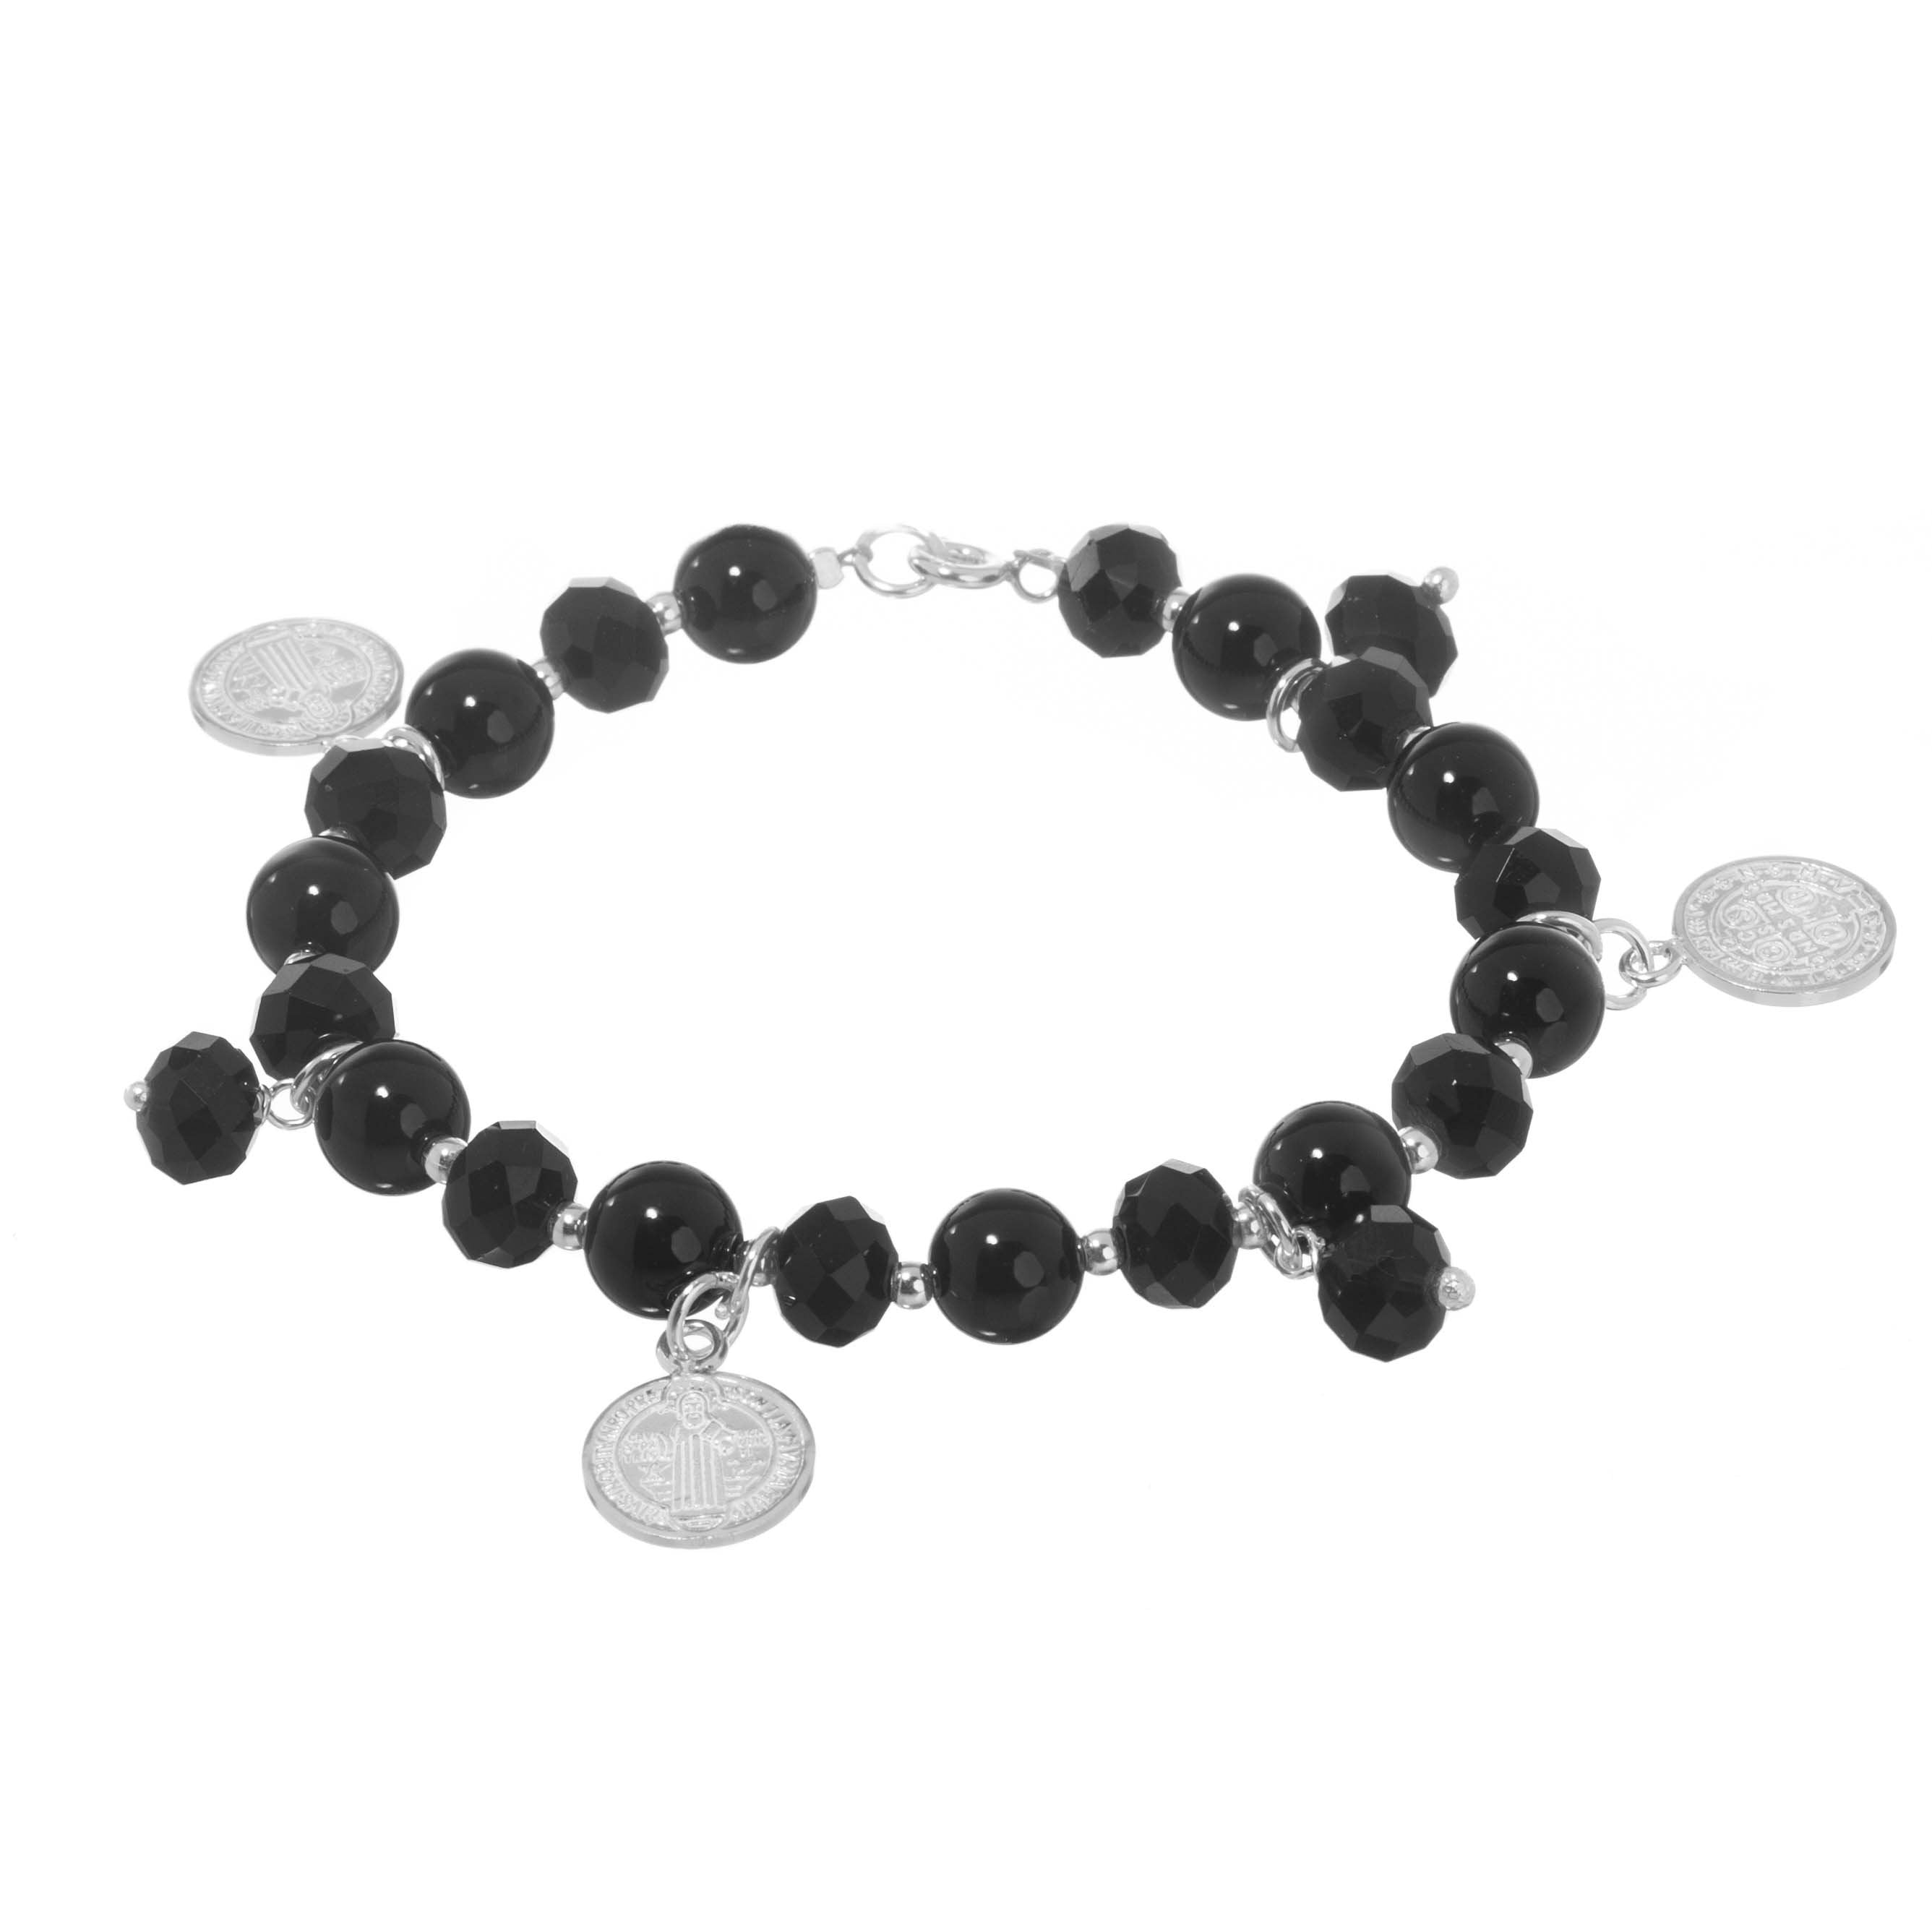 San Benito bracelet in silver with pendant medals